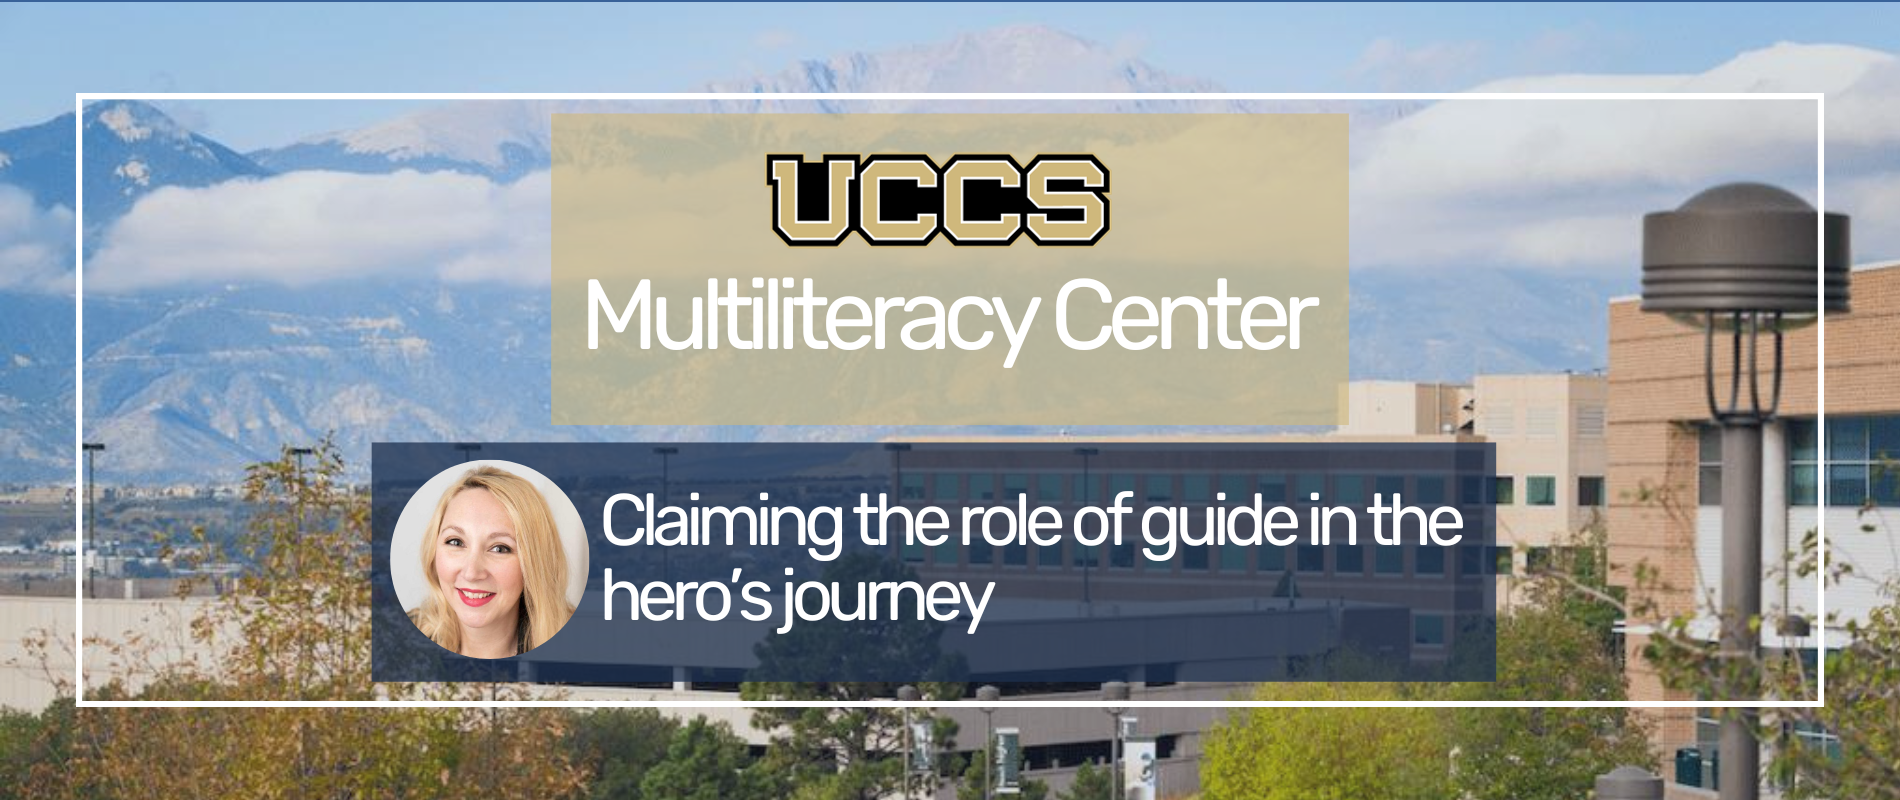 Jessica Mehring speaks at the UCCS Multiliteracy Center